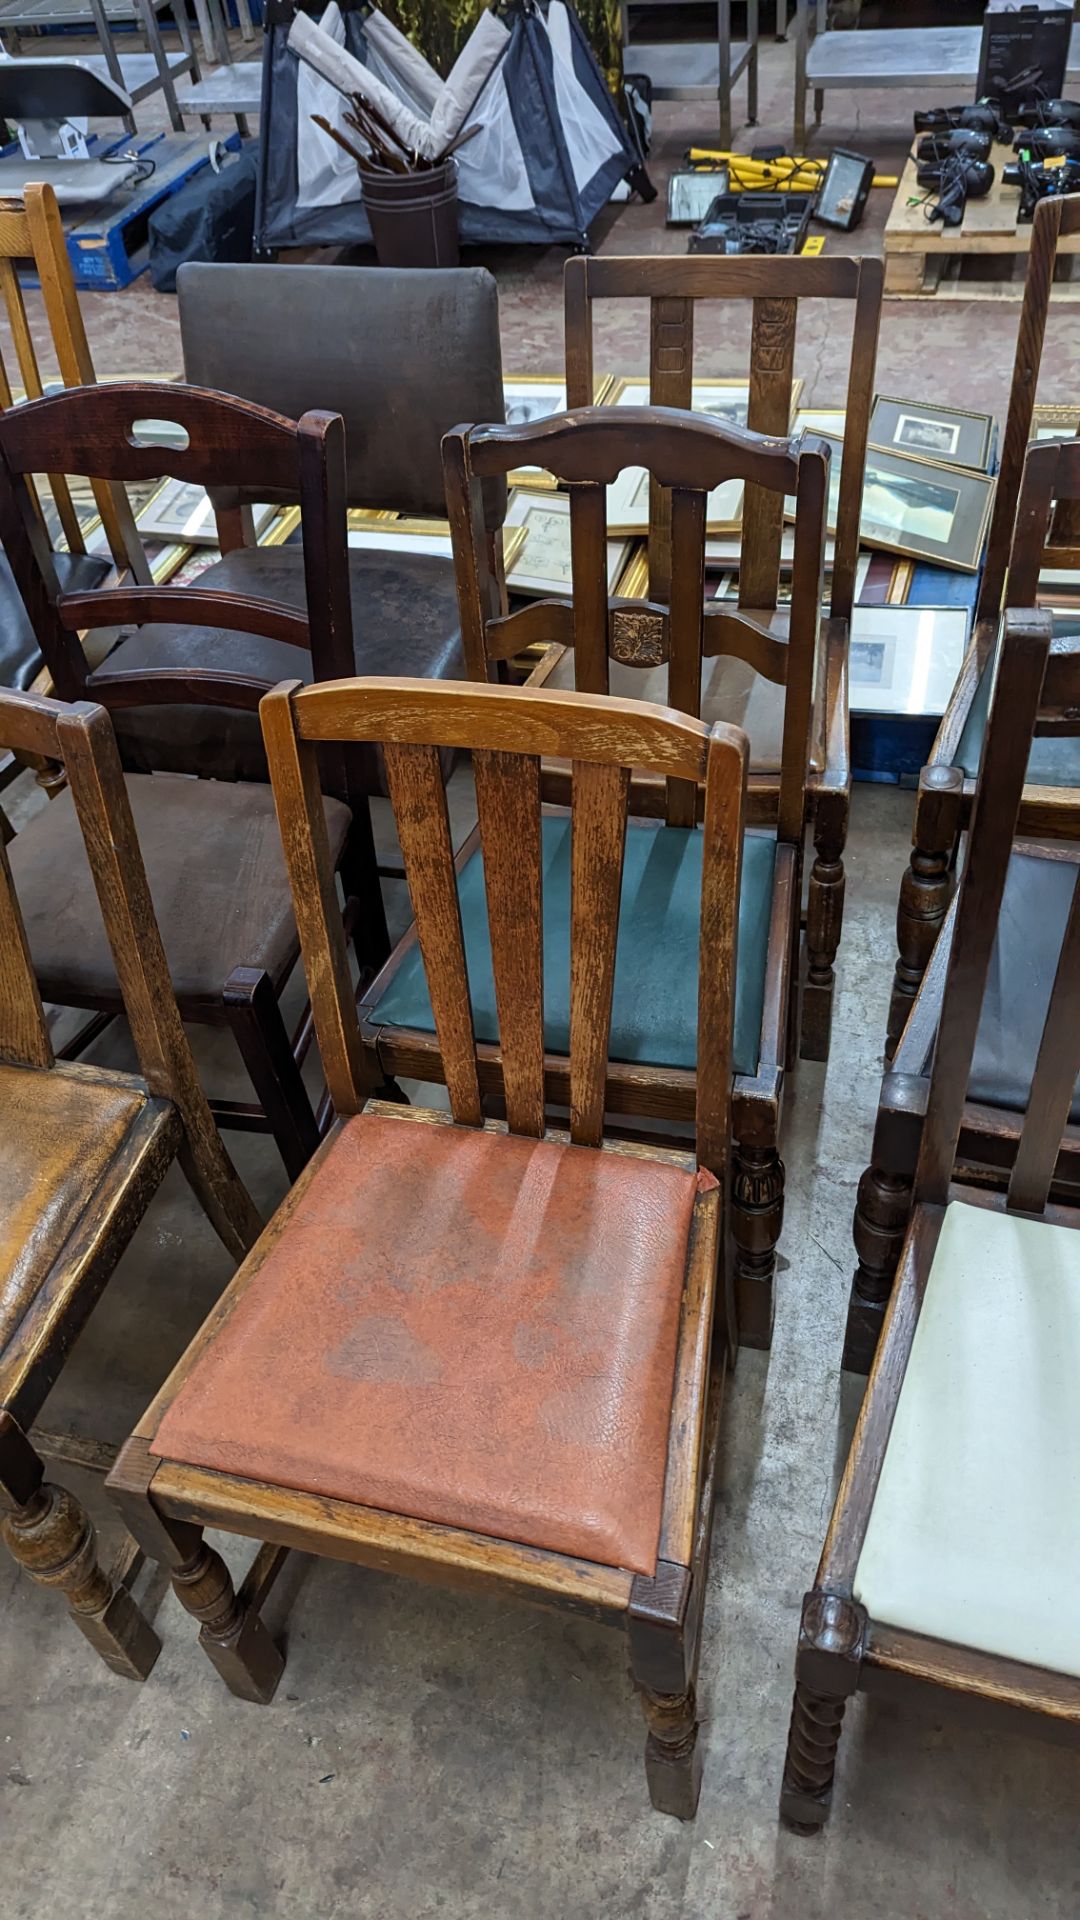 12 off assorted wooden dining chairs - Image 4 of 7